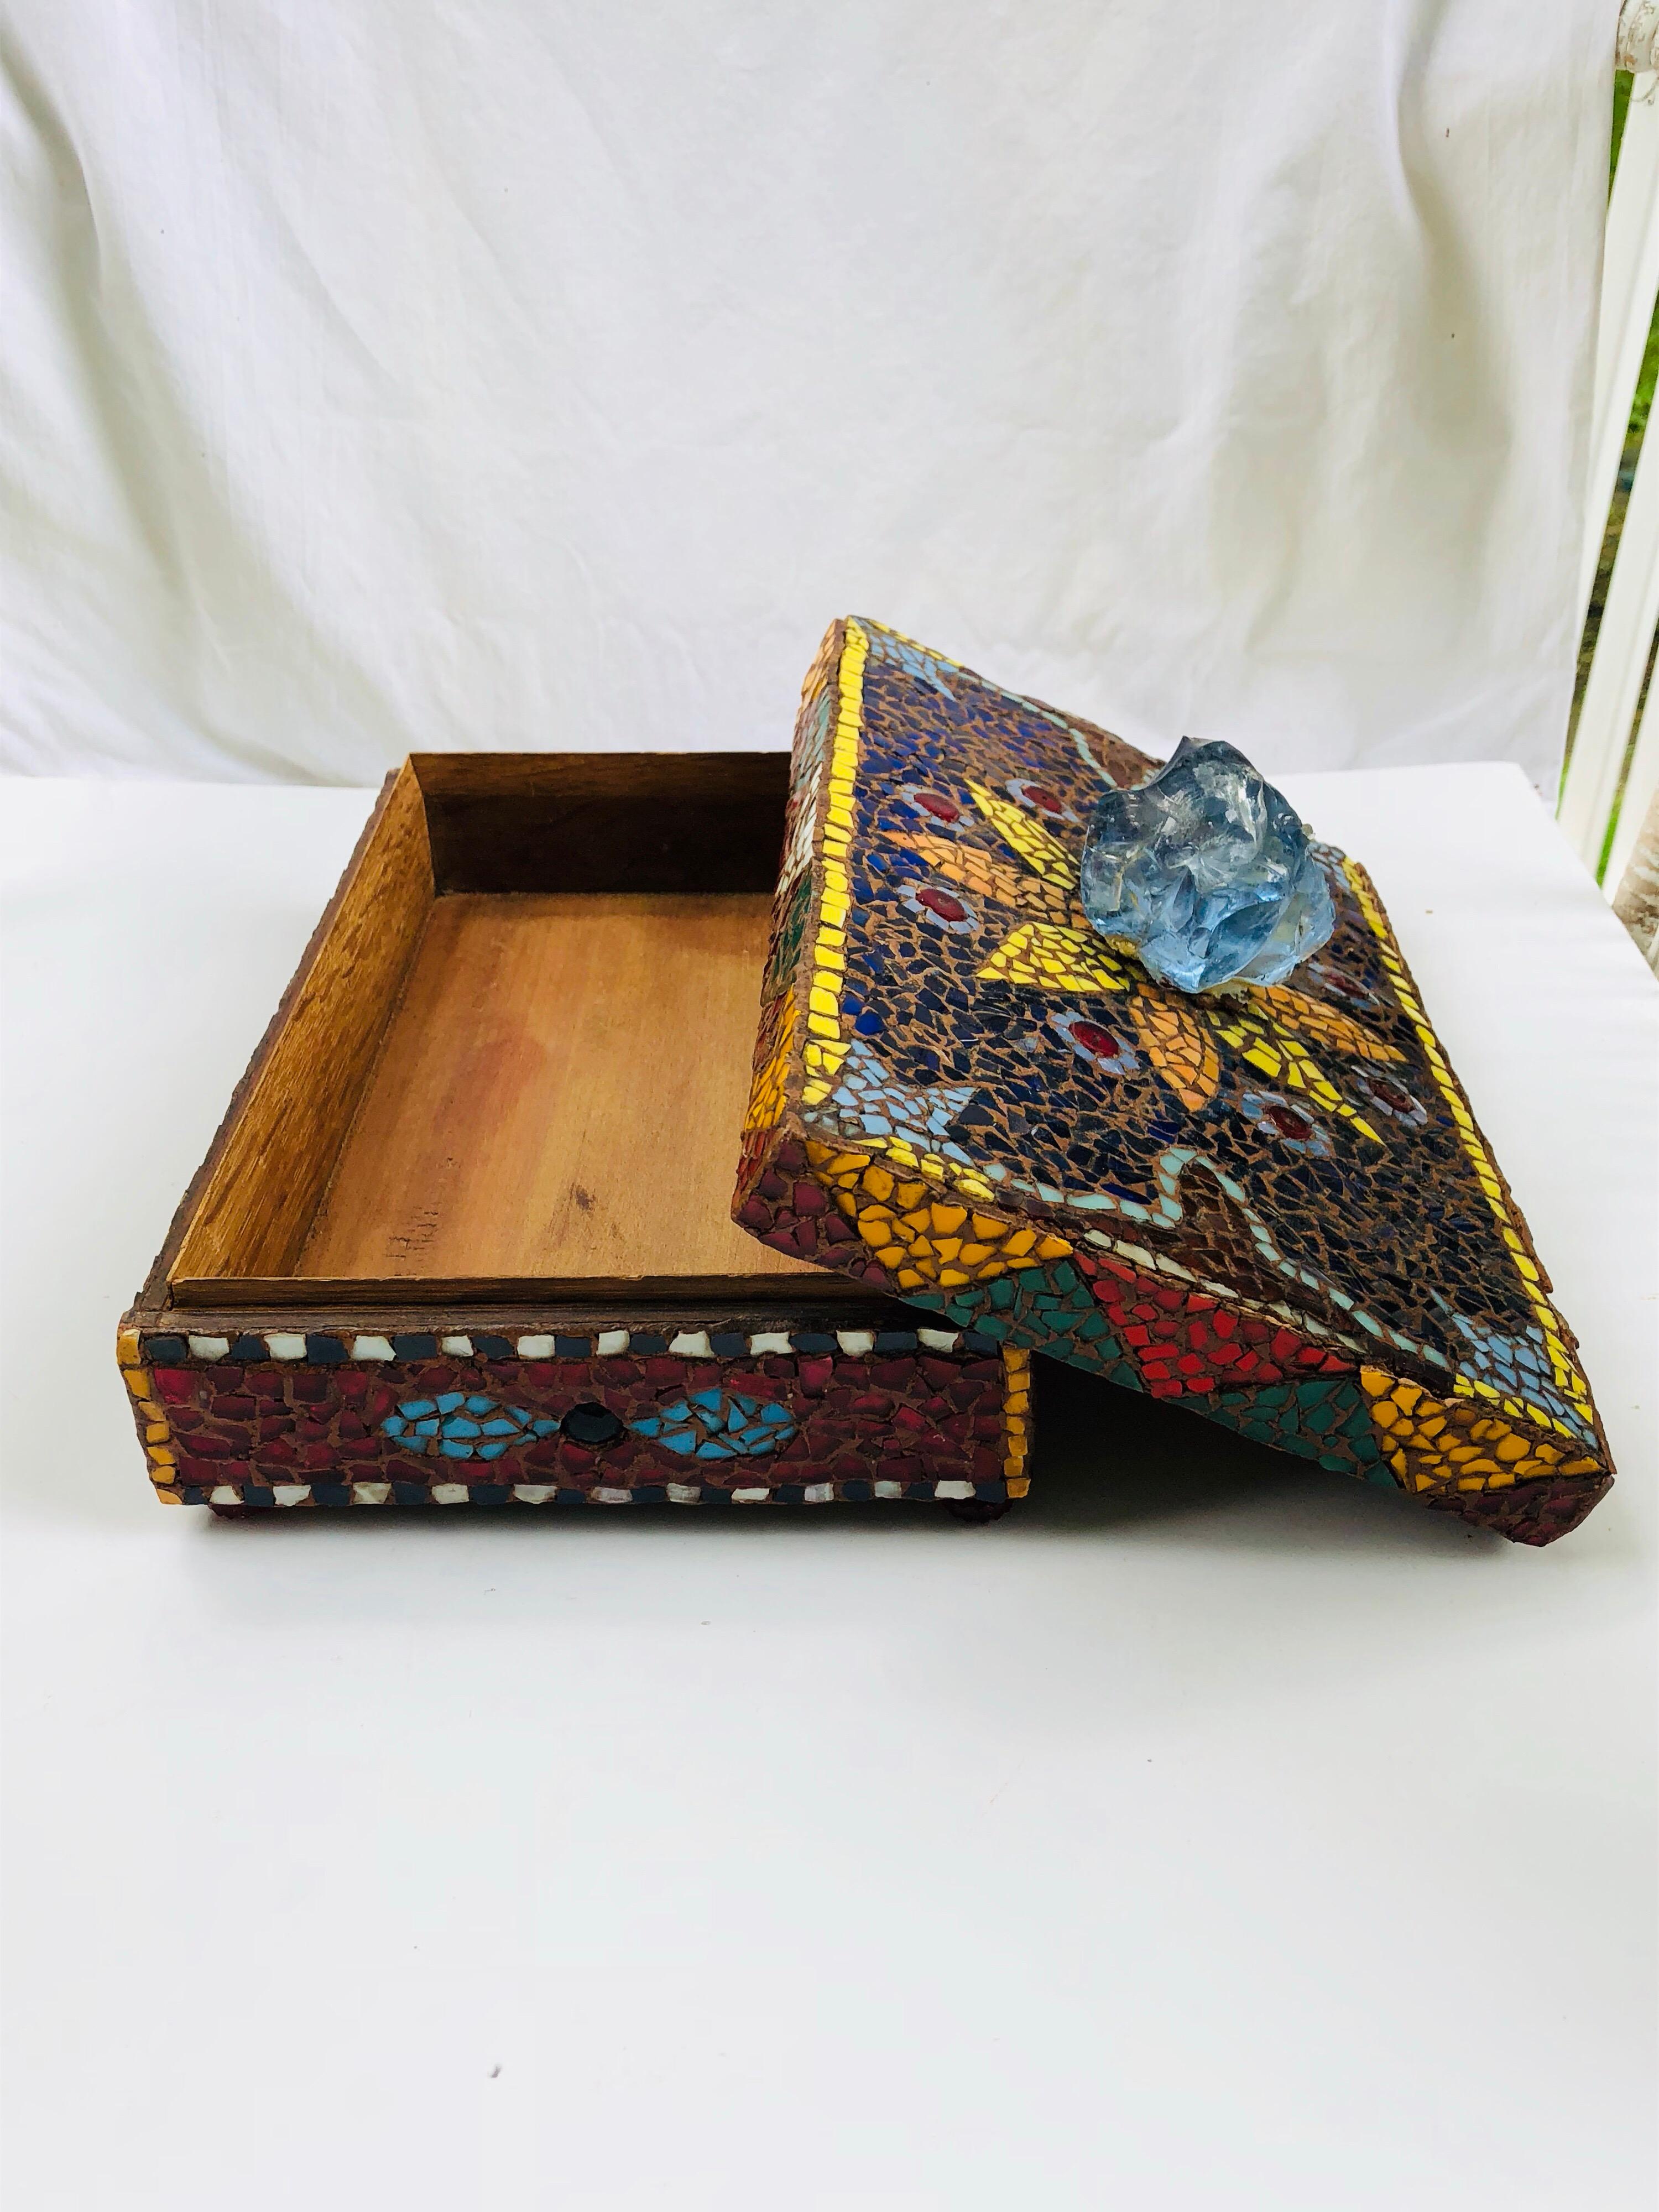 French Pique Assiette Mosaic Box In Good Condition For Sale In Hudson, NY